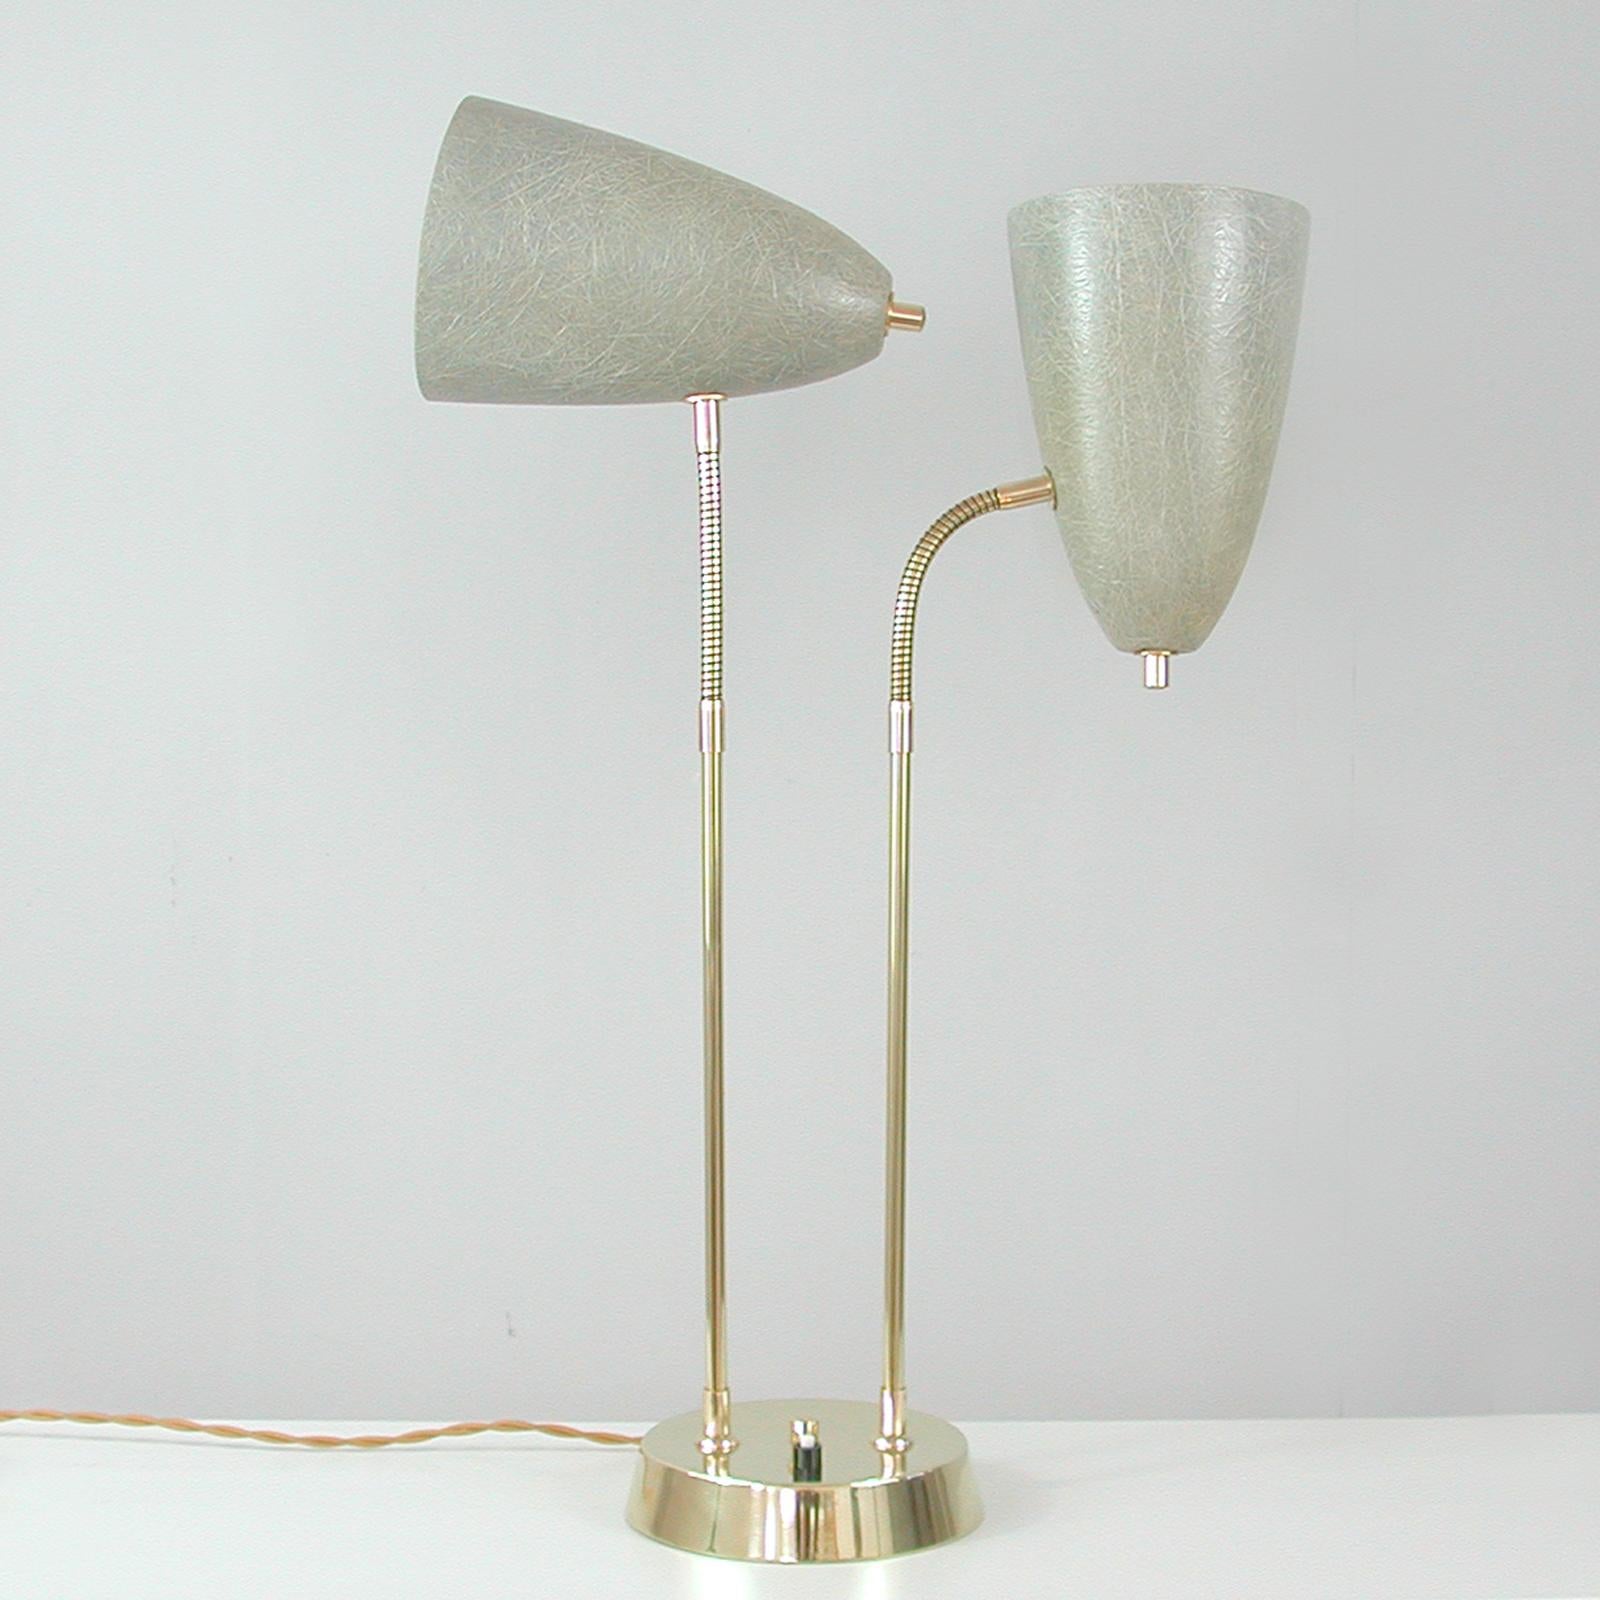 This unusual desk lamp was designed and manufactured in Sweden in the 1950s. It features a brass lamp base, brass lamp rods and two adjustable cone shaped lamp shades made of grey fiberglass. The lamp shades can be turned in any possible direction.